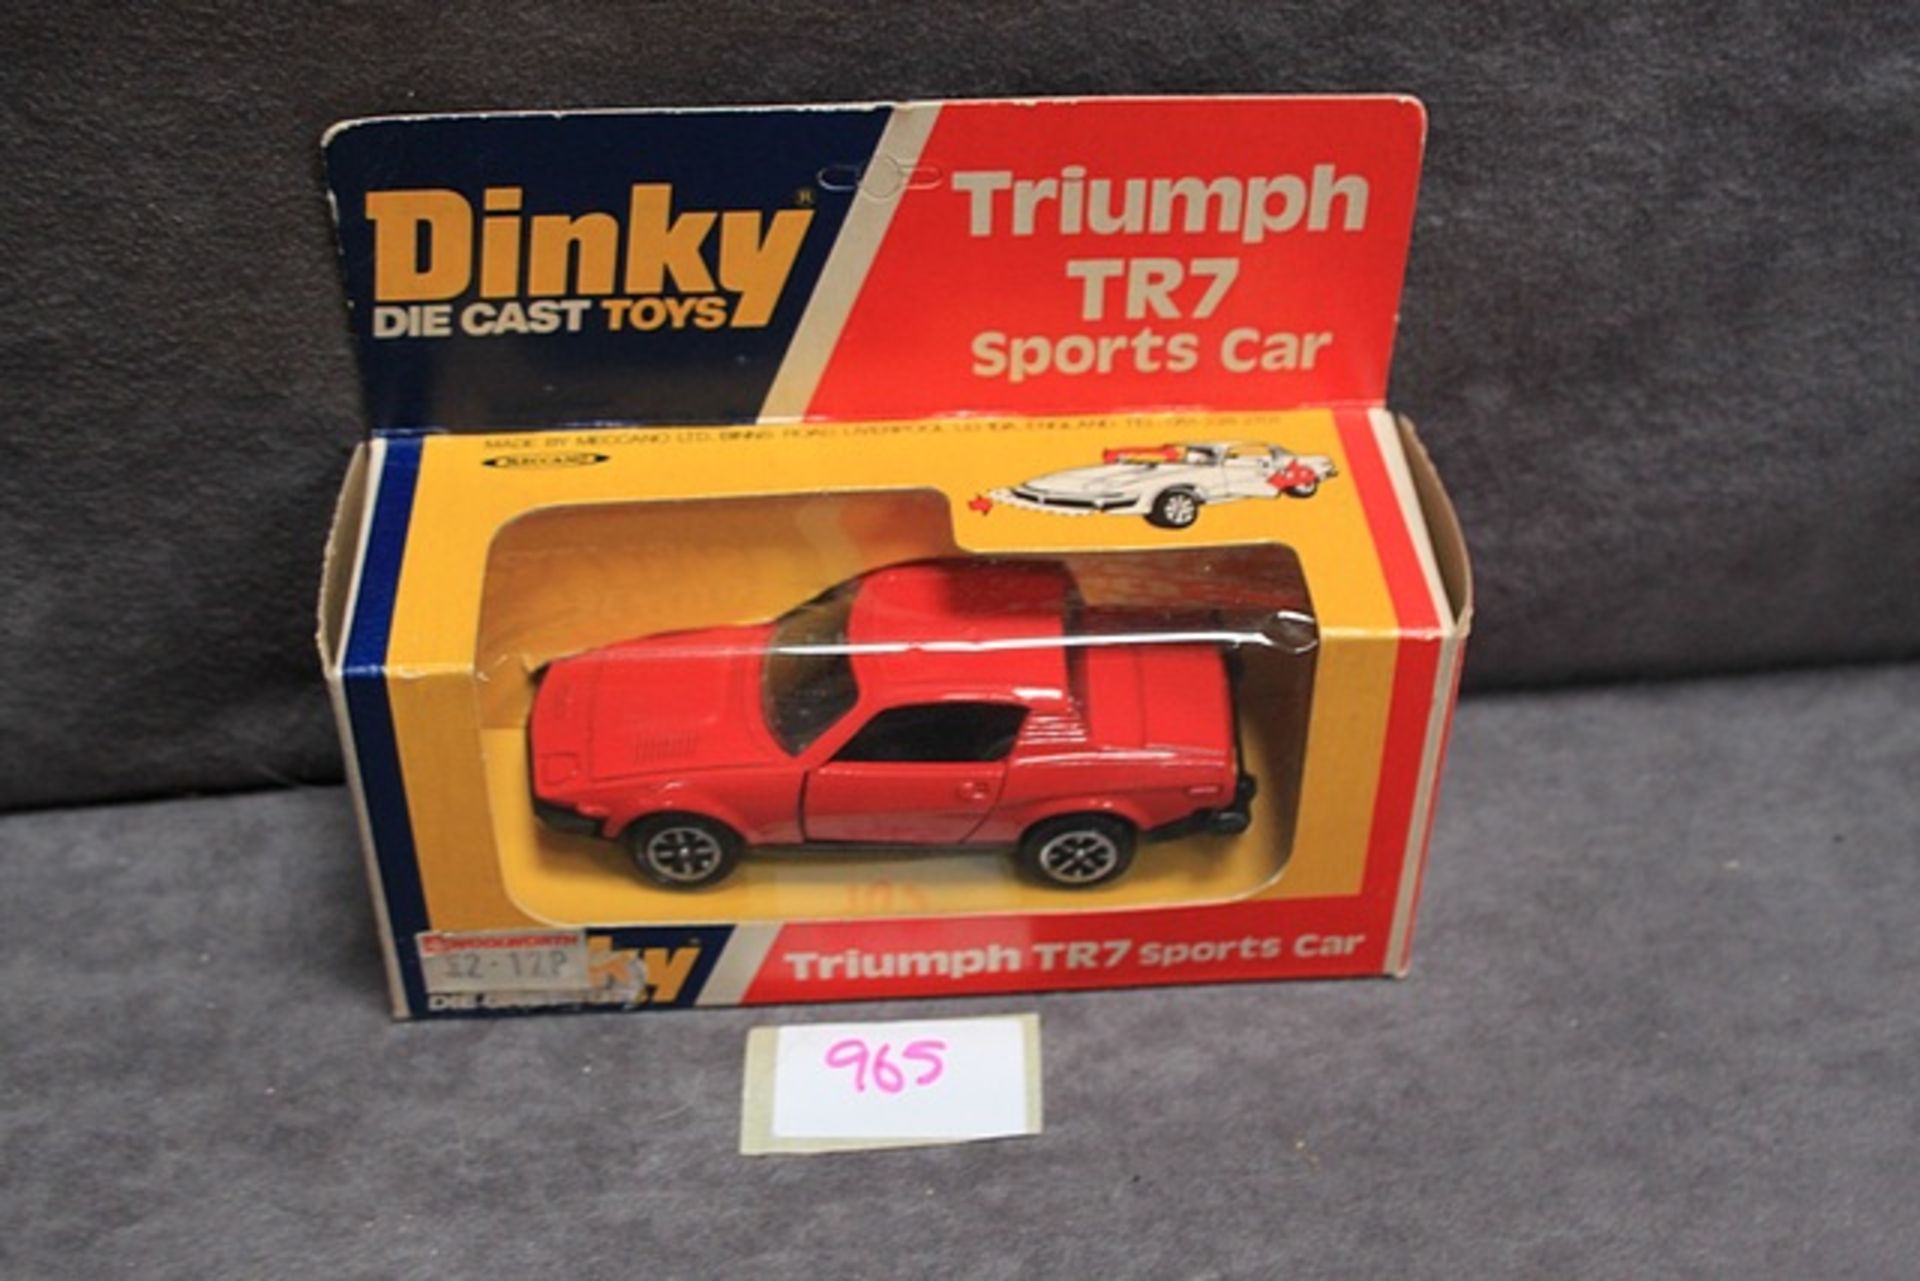 Mint Dinky Diecast Toys #211 Triumph TR7 Sports Car in red in excellent box - Image 2 of 2